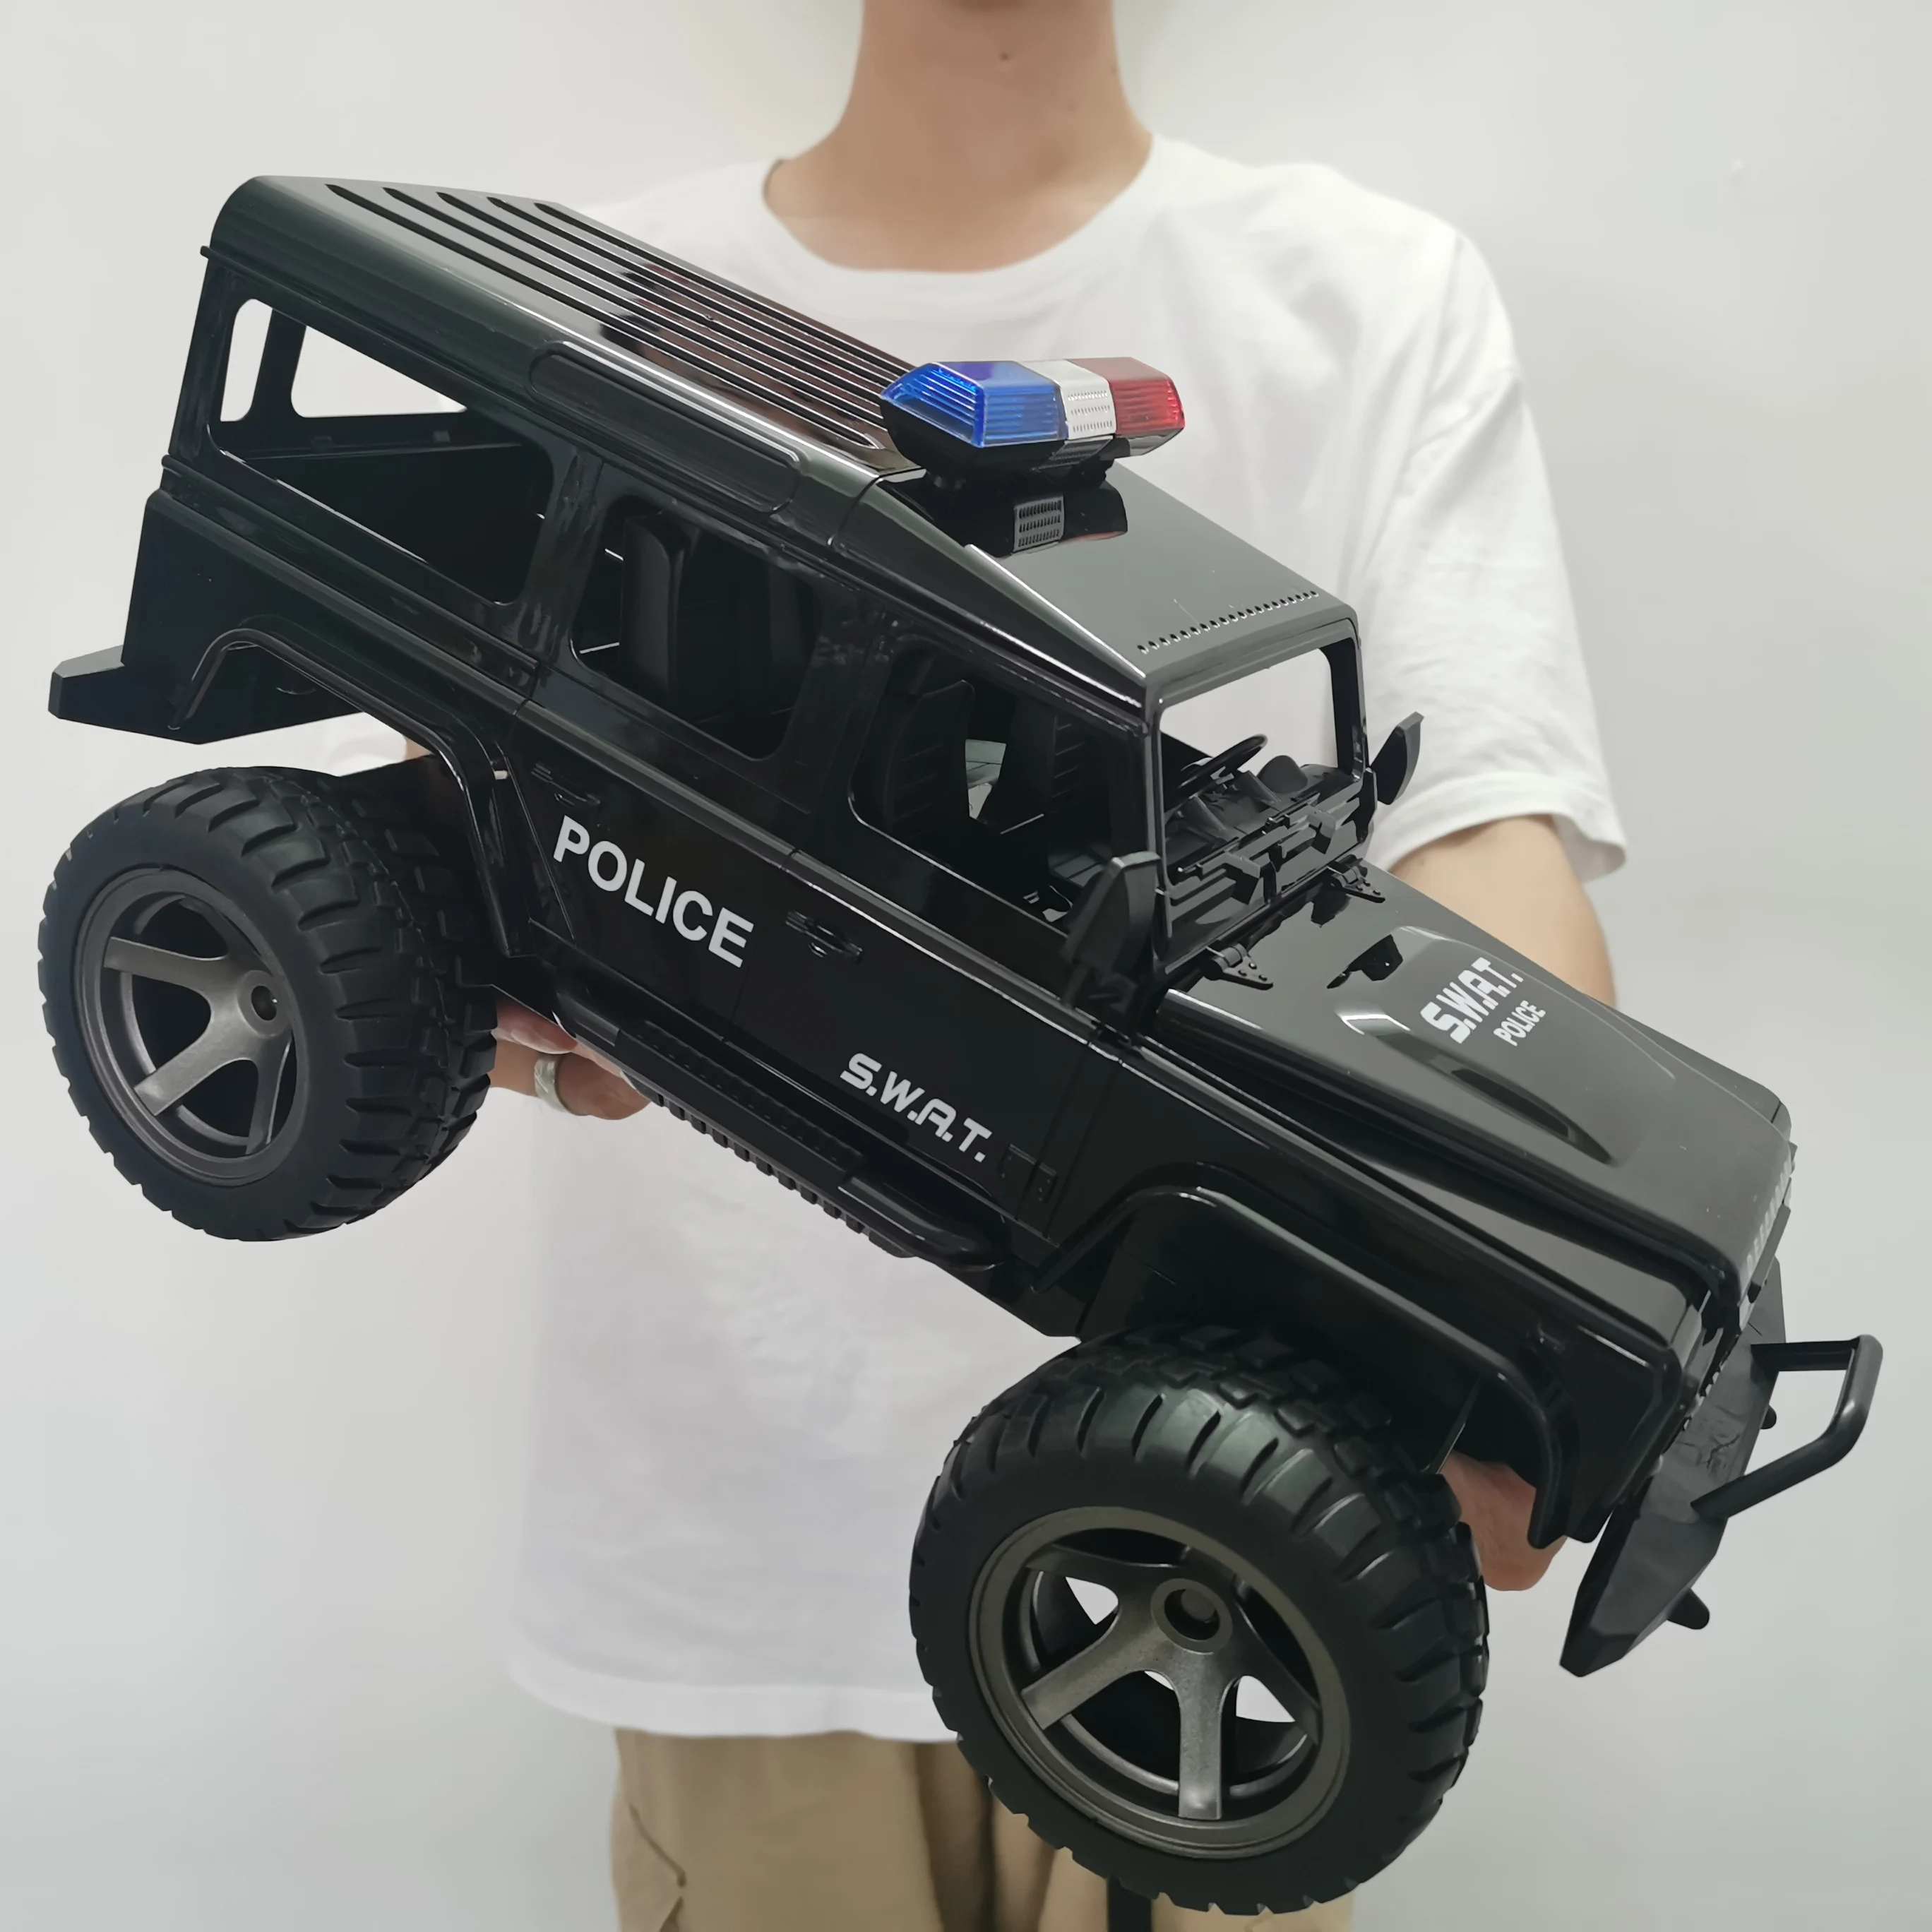 Enlarge Double E 1:14 Large Land Rover D110 Police Offroad Buggy Big Remote Control vehicles Climbing Car Children Toys for Boys Gifts